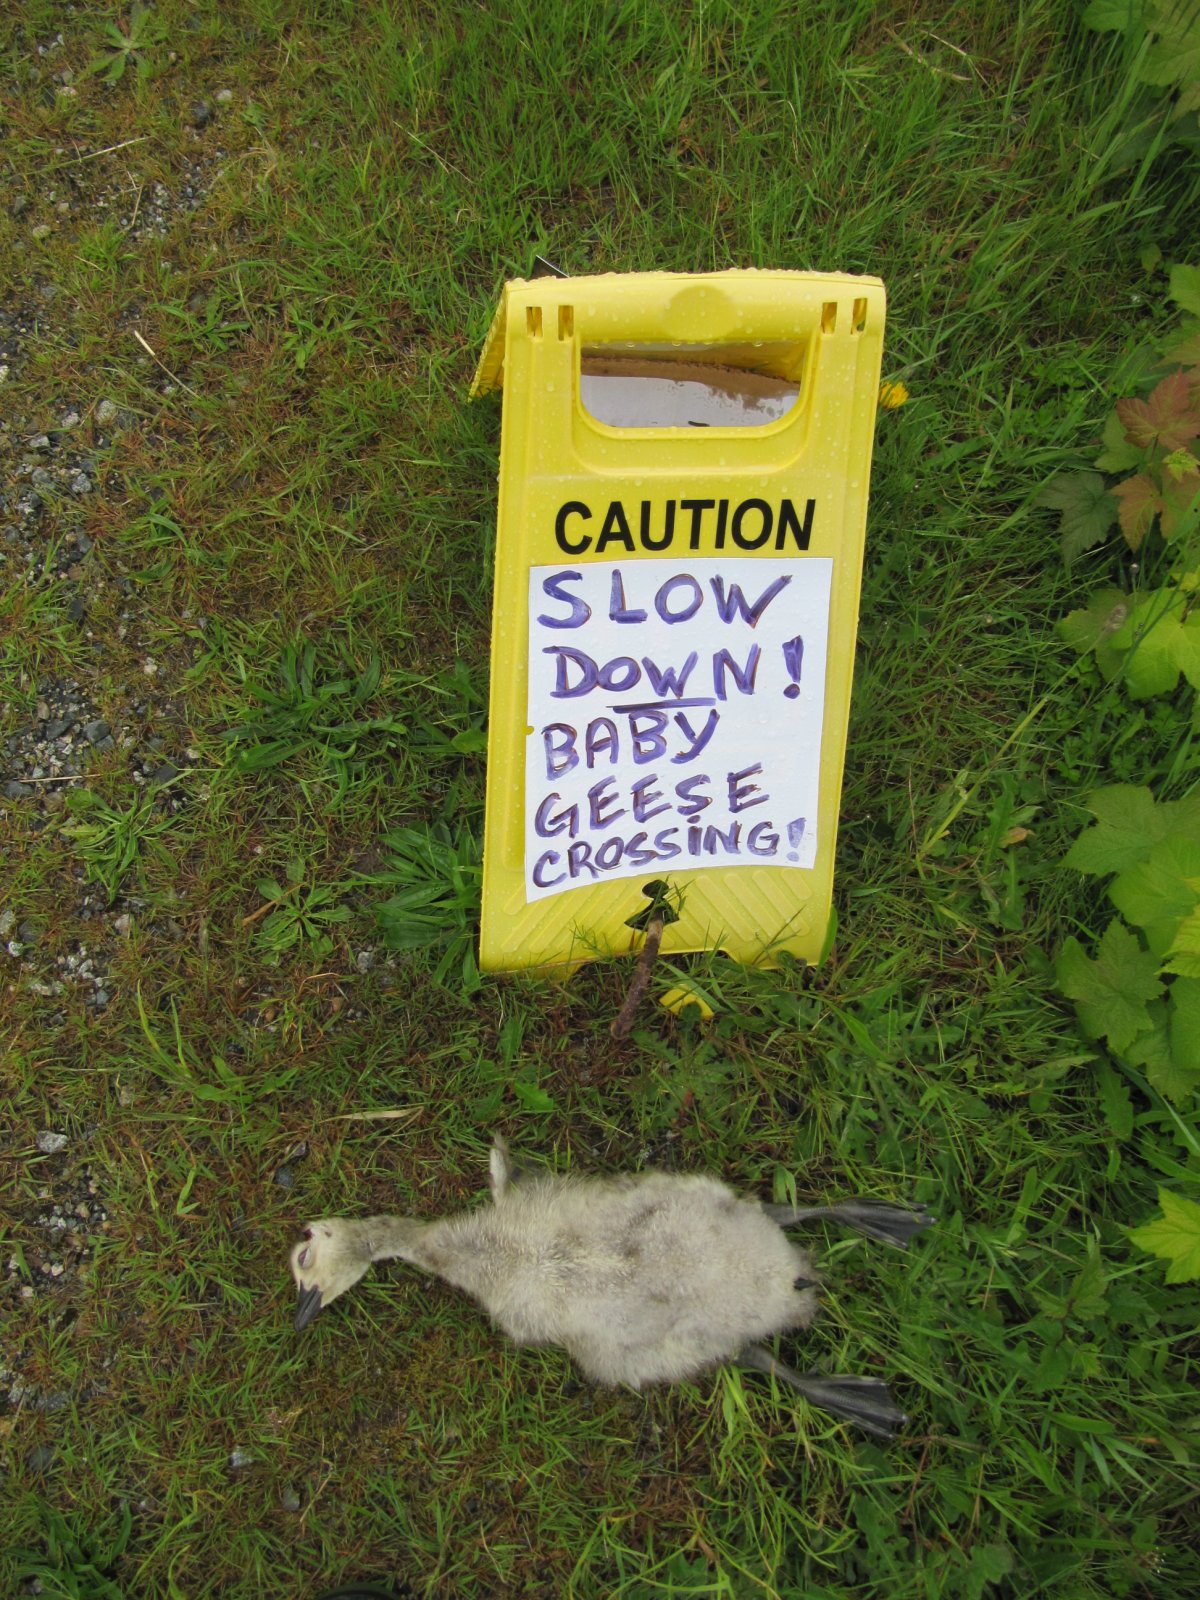 Langley residents making their own signs to warn drivers of crossing geese.